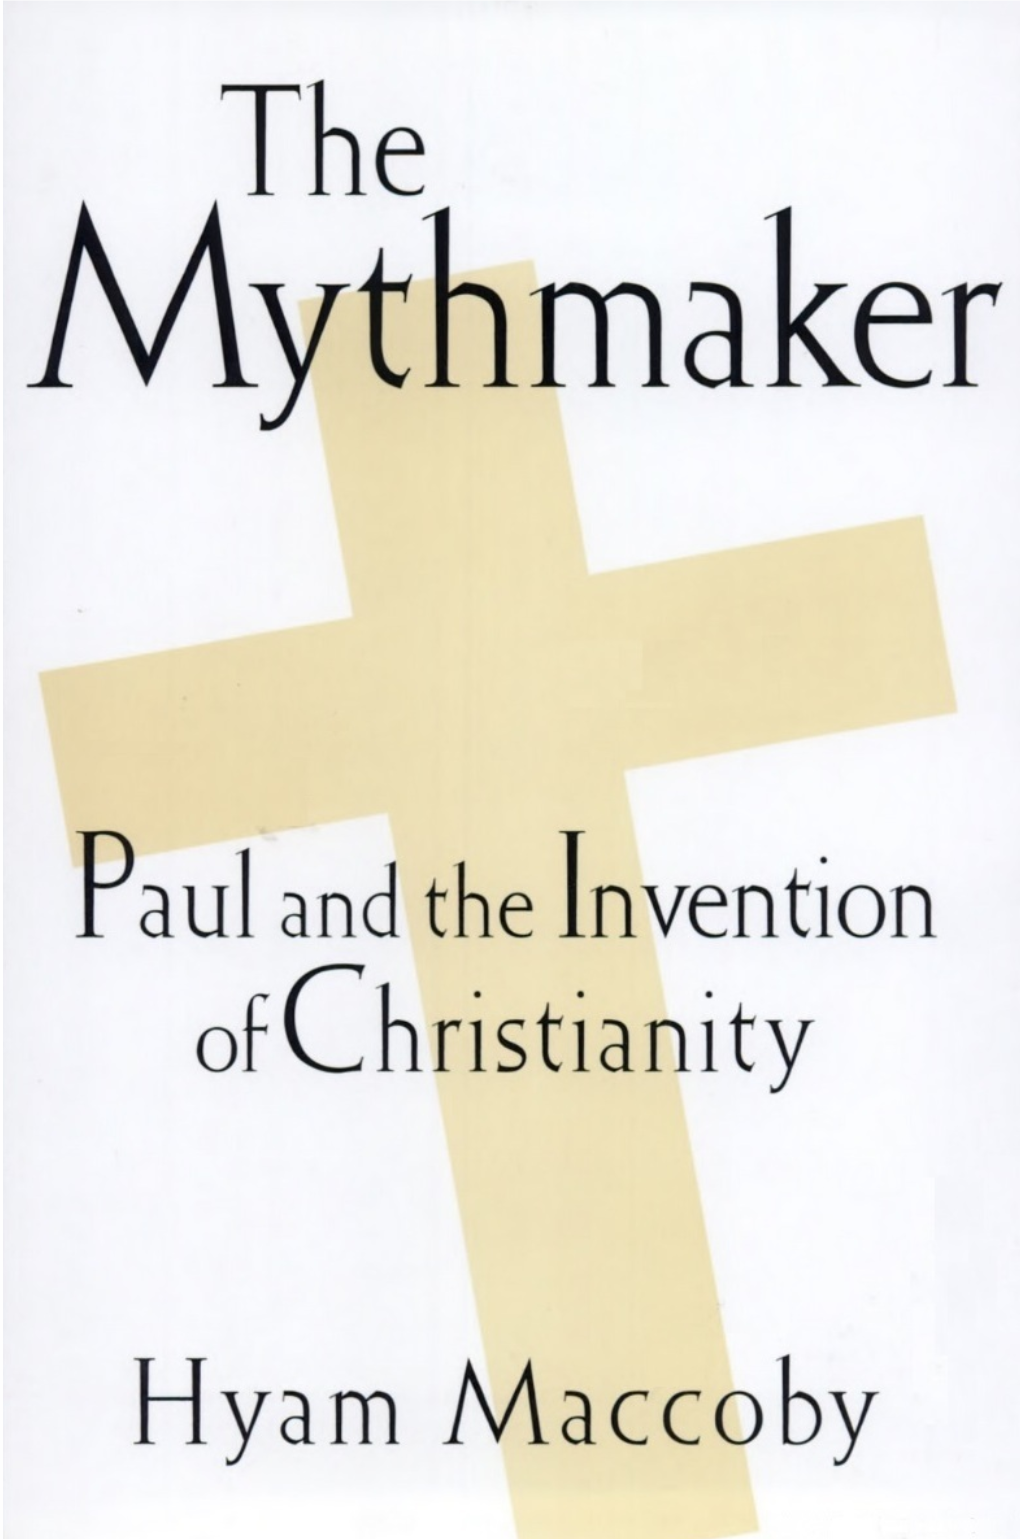 The Mythmaker. Paul and the Invention of Christianity